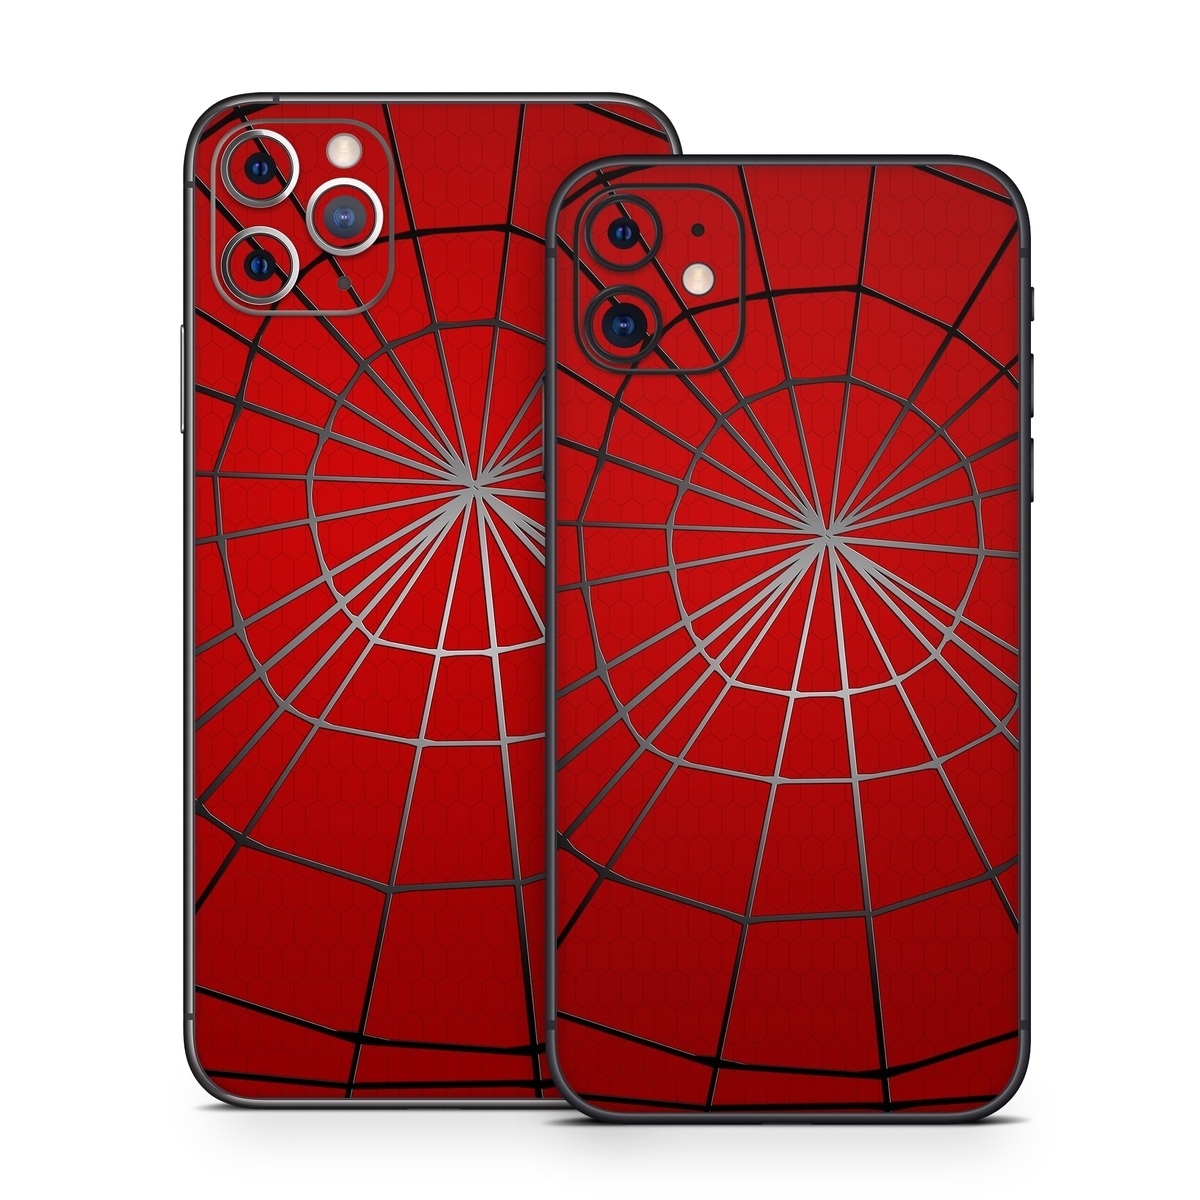 iPhone 11 Skin design of Red, Symmetry, Circle, Pattern, Line with red, black, gray colors